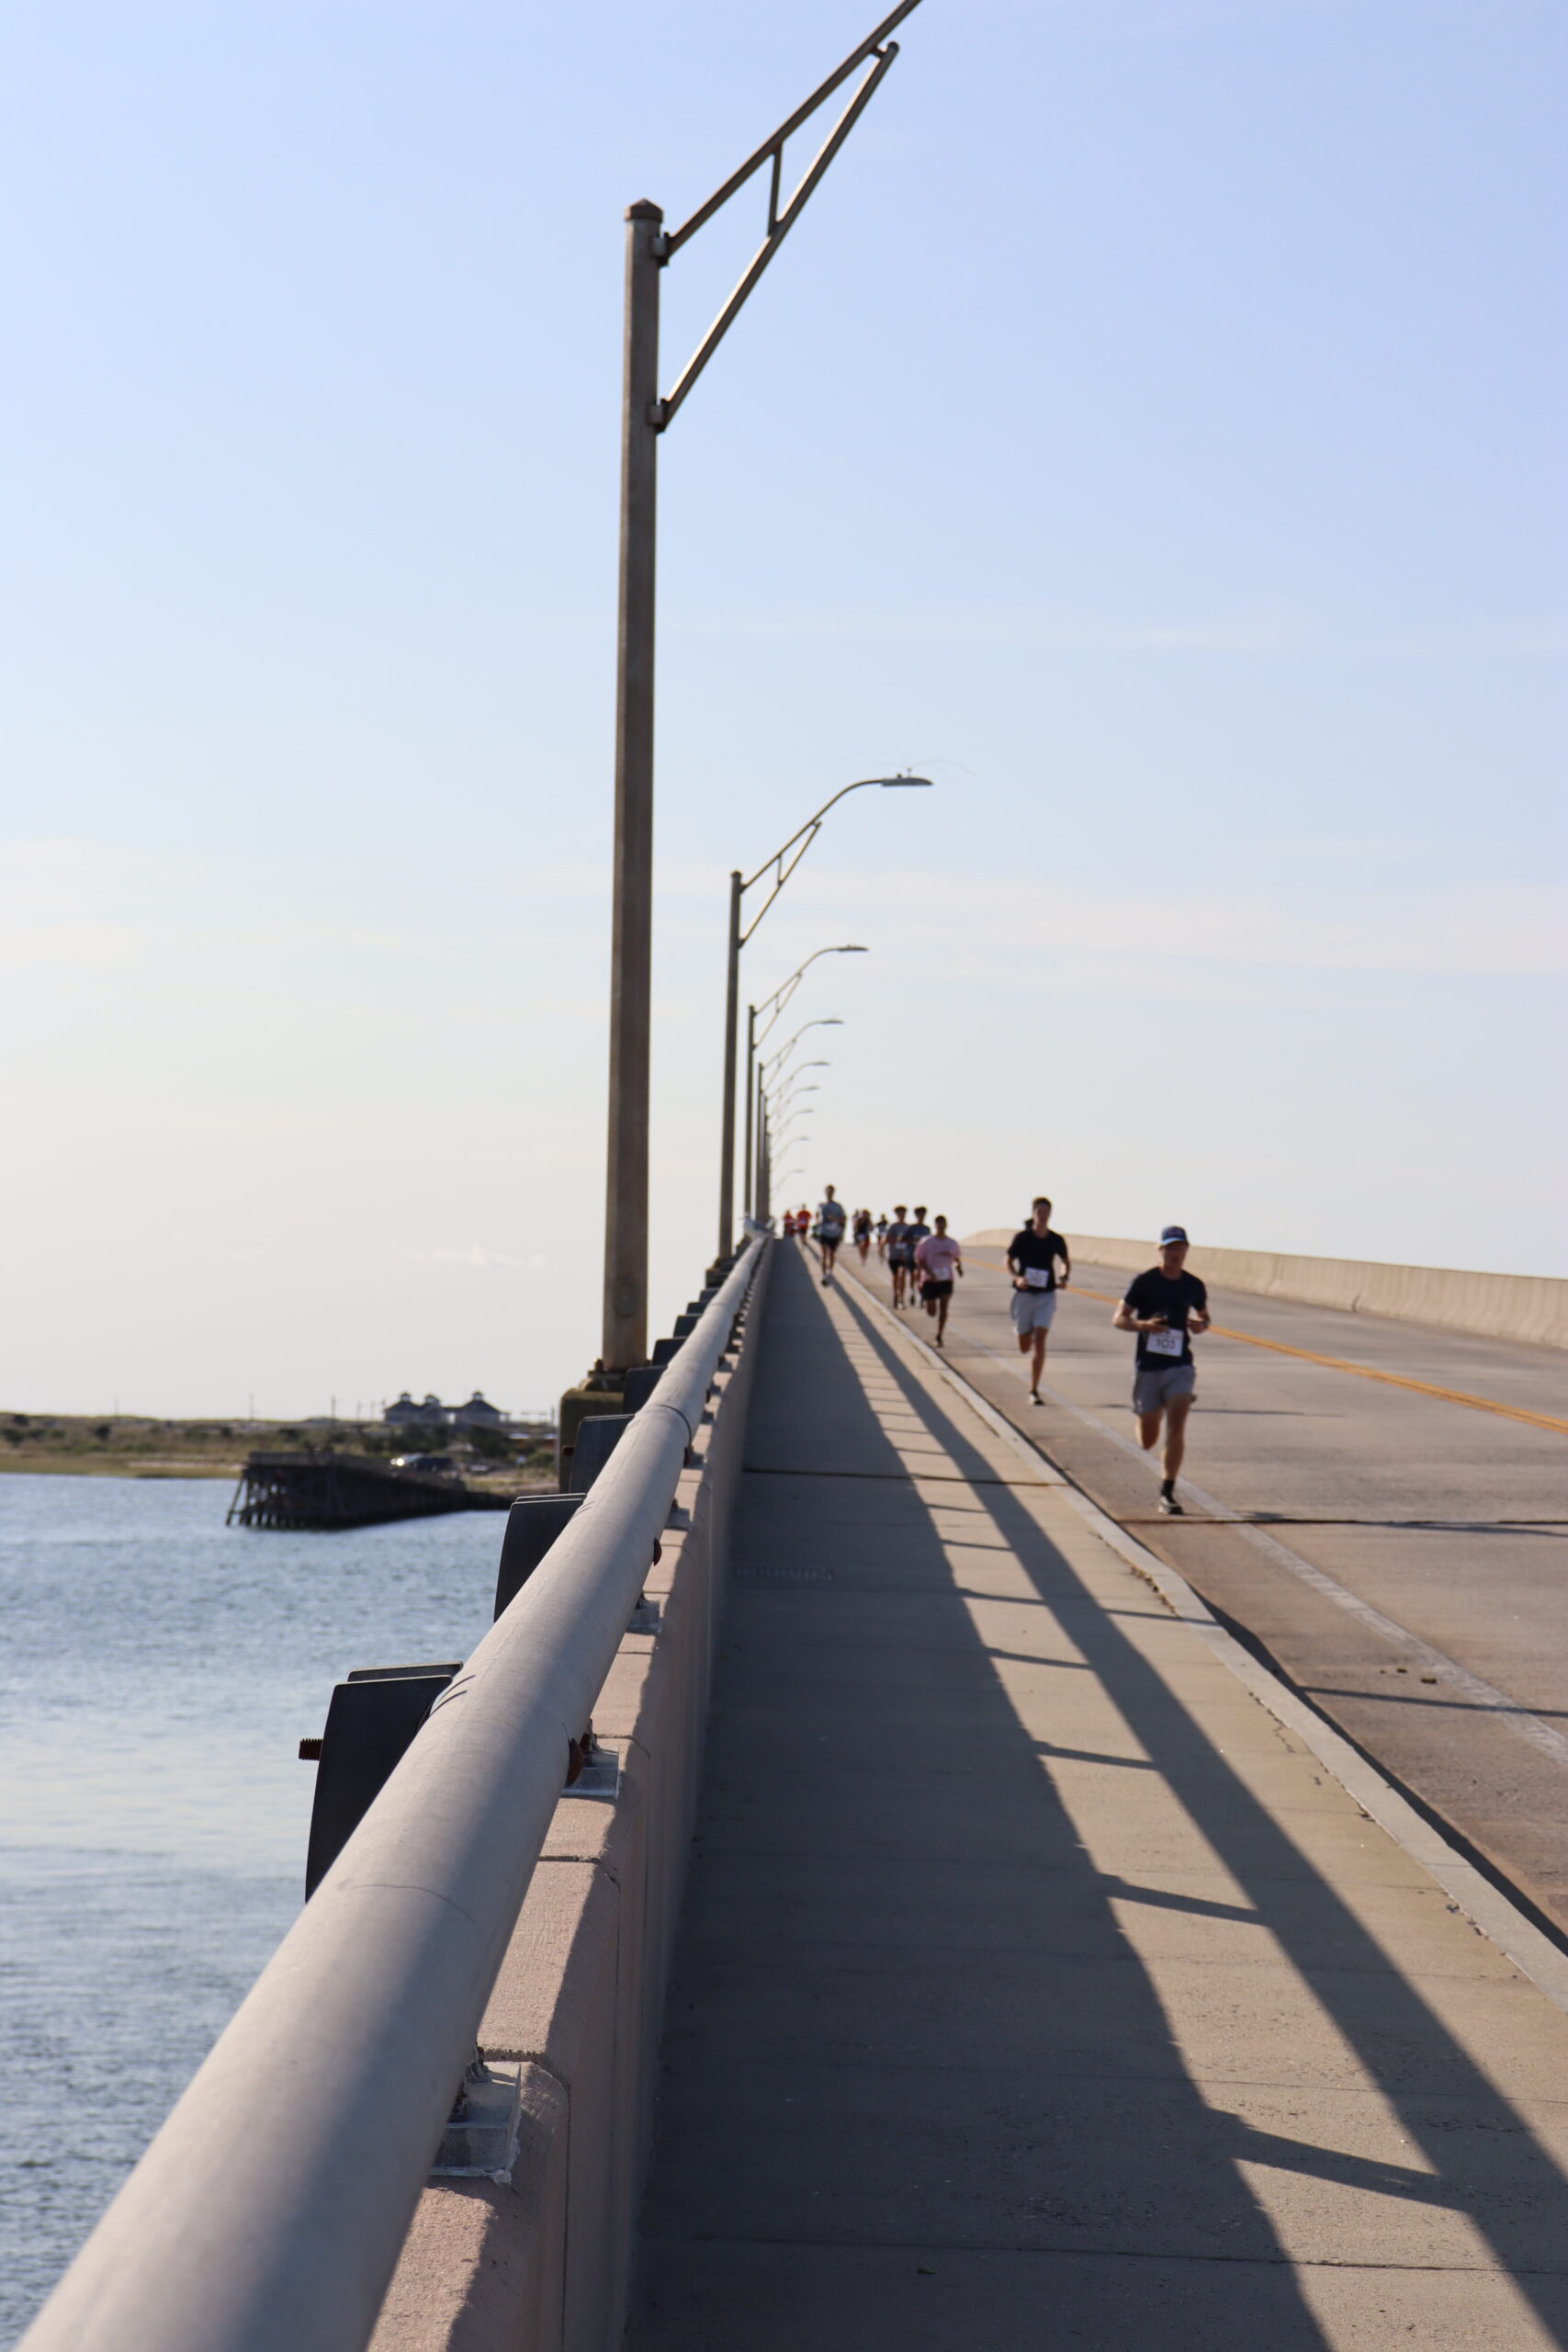 Runners come over the Ponquogue Bridge in Hampton Bays in the 11th annual Over the Bridge 5K and 10K on Saturday. CAILIN RILEY